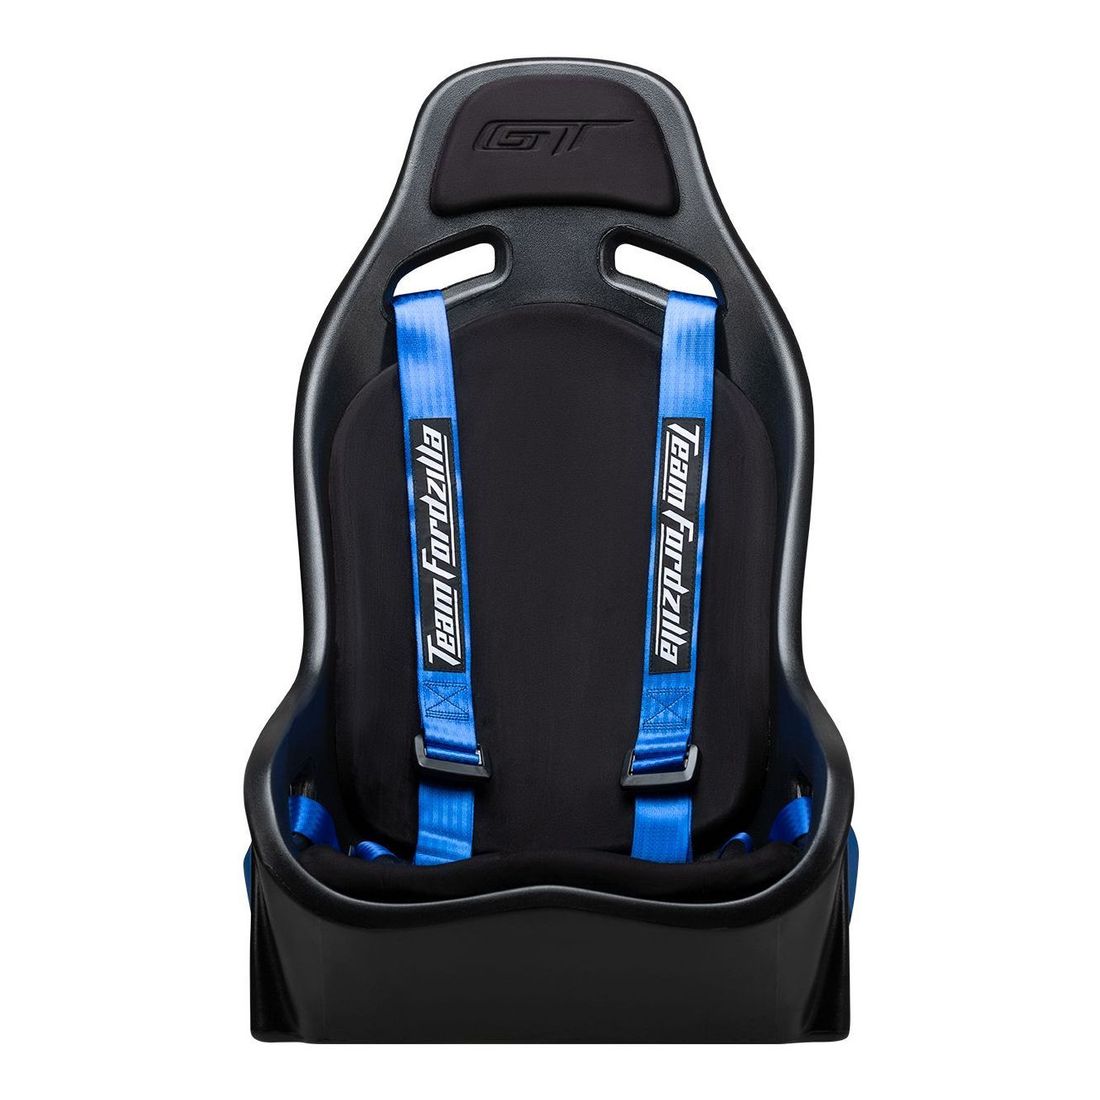 Next Level Racing Elite ES1 Racing Simulator Seat - Ford GT Edition (Electronics & Accessories Not Included)